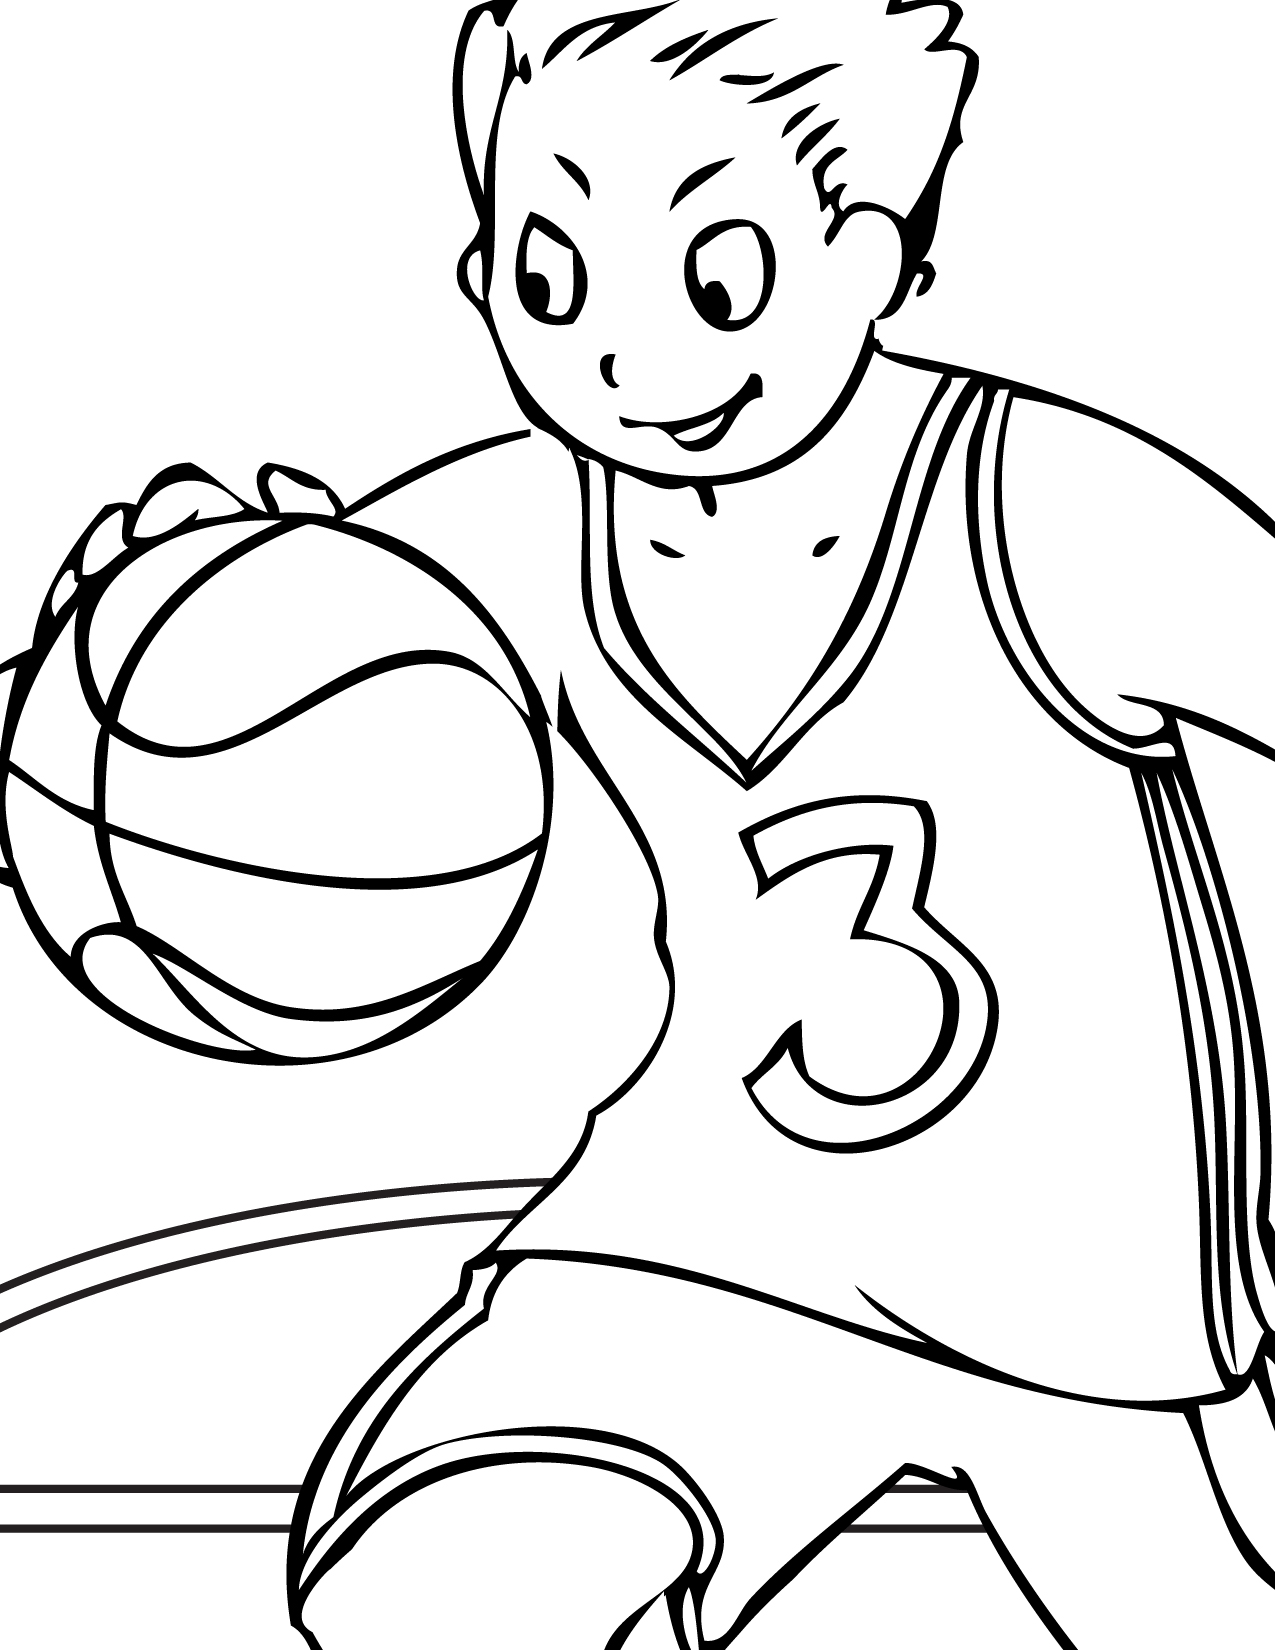 sports colouring sheets free printable sports coloring pages for kids colouring sports sheets 1 2